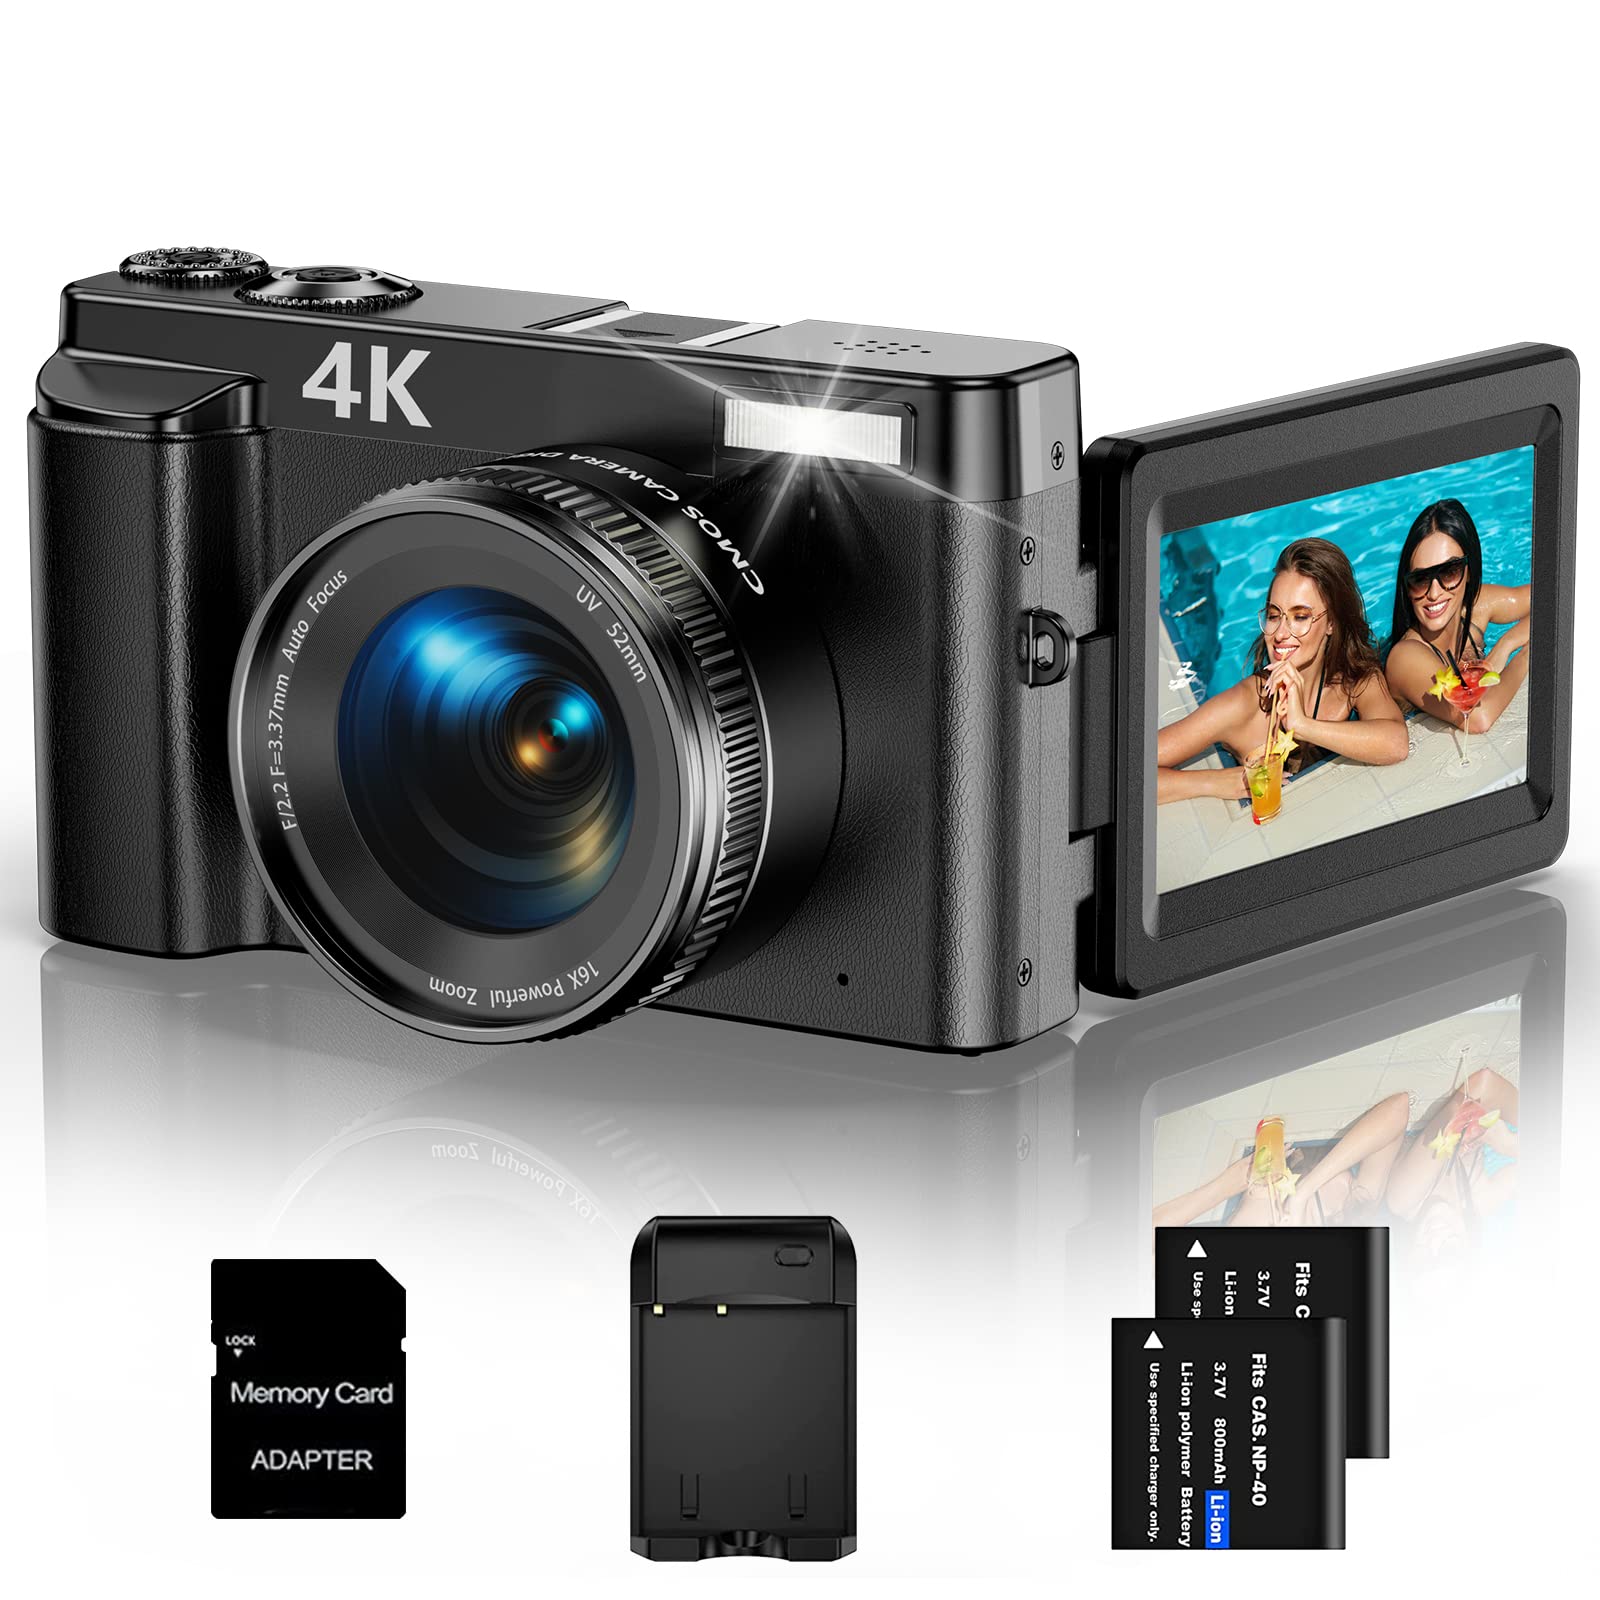 KVUTCIEIN 4K Digital Camera for Photography and Video Autofocus 48MP Vlogging Camera for YouTube Compact Camera 16X Digital Zoom with Flas